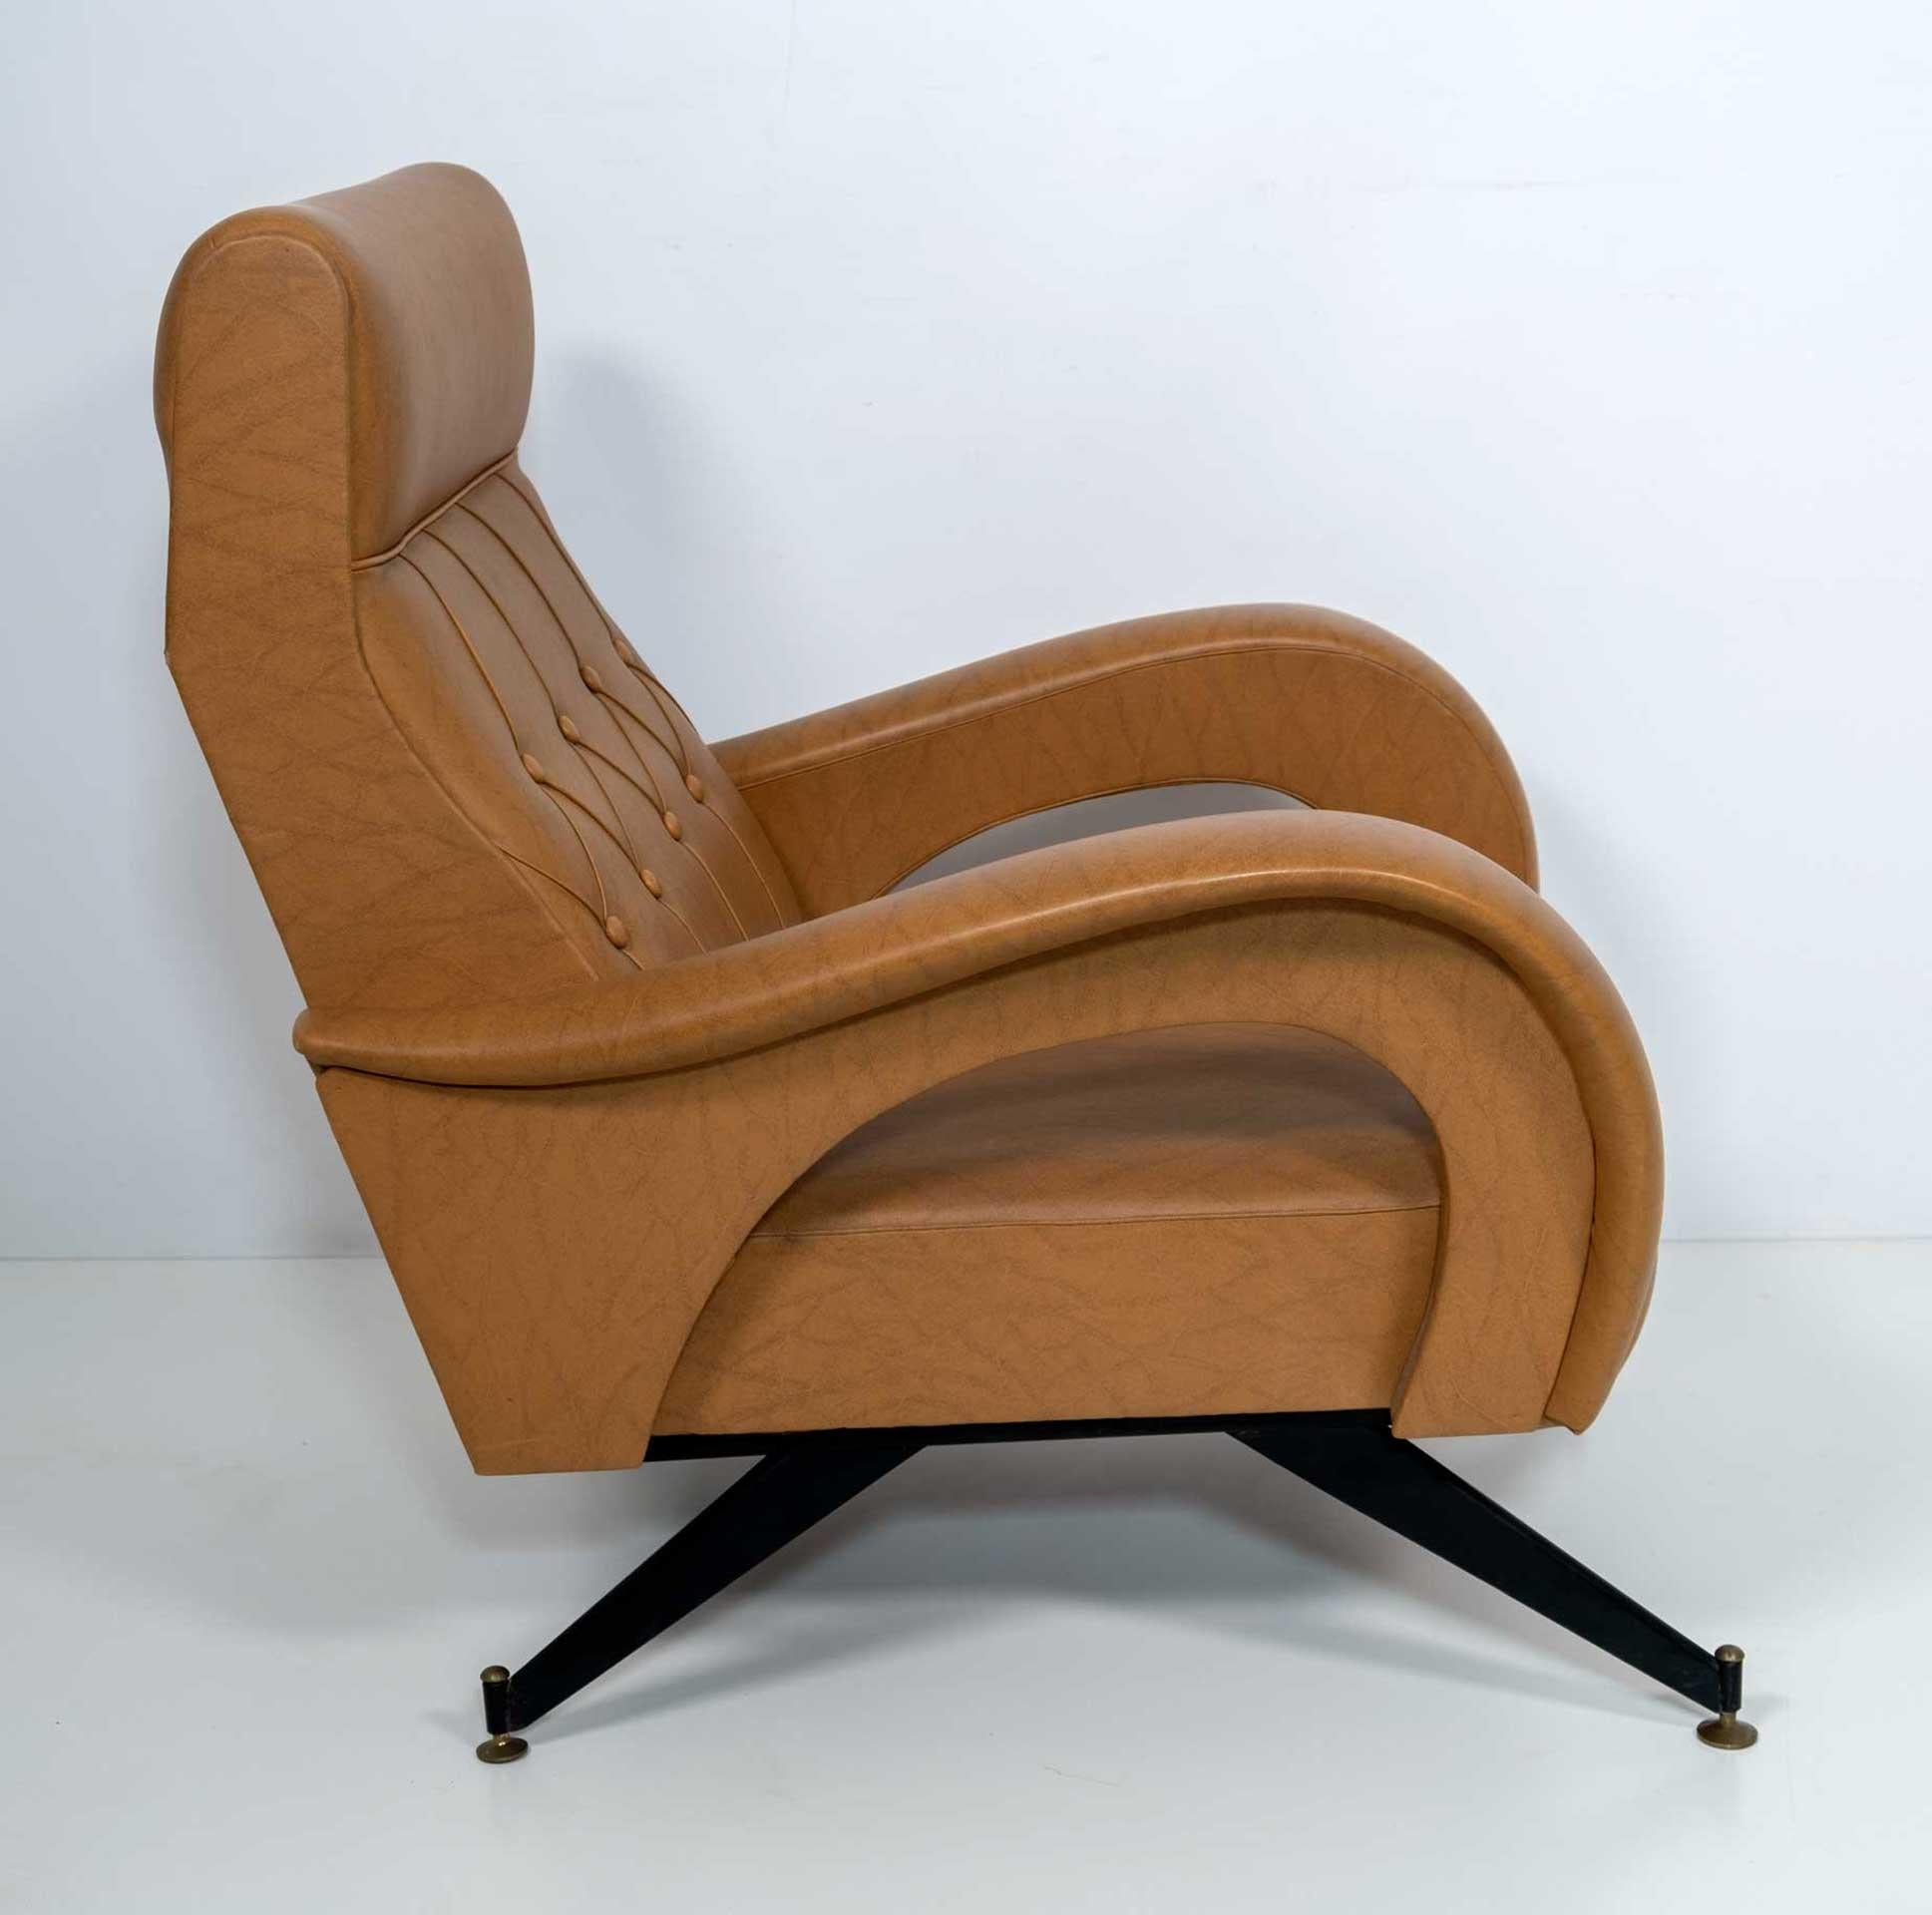 Marco Zanuso Style Mid-Century Modern Italian Leather Lounge Chair, 1970s For Sale 1